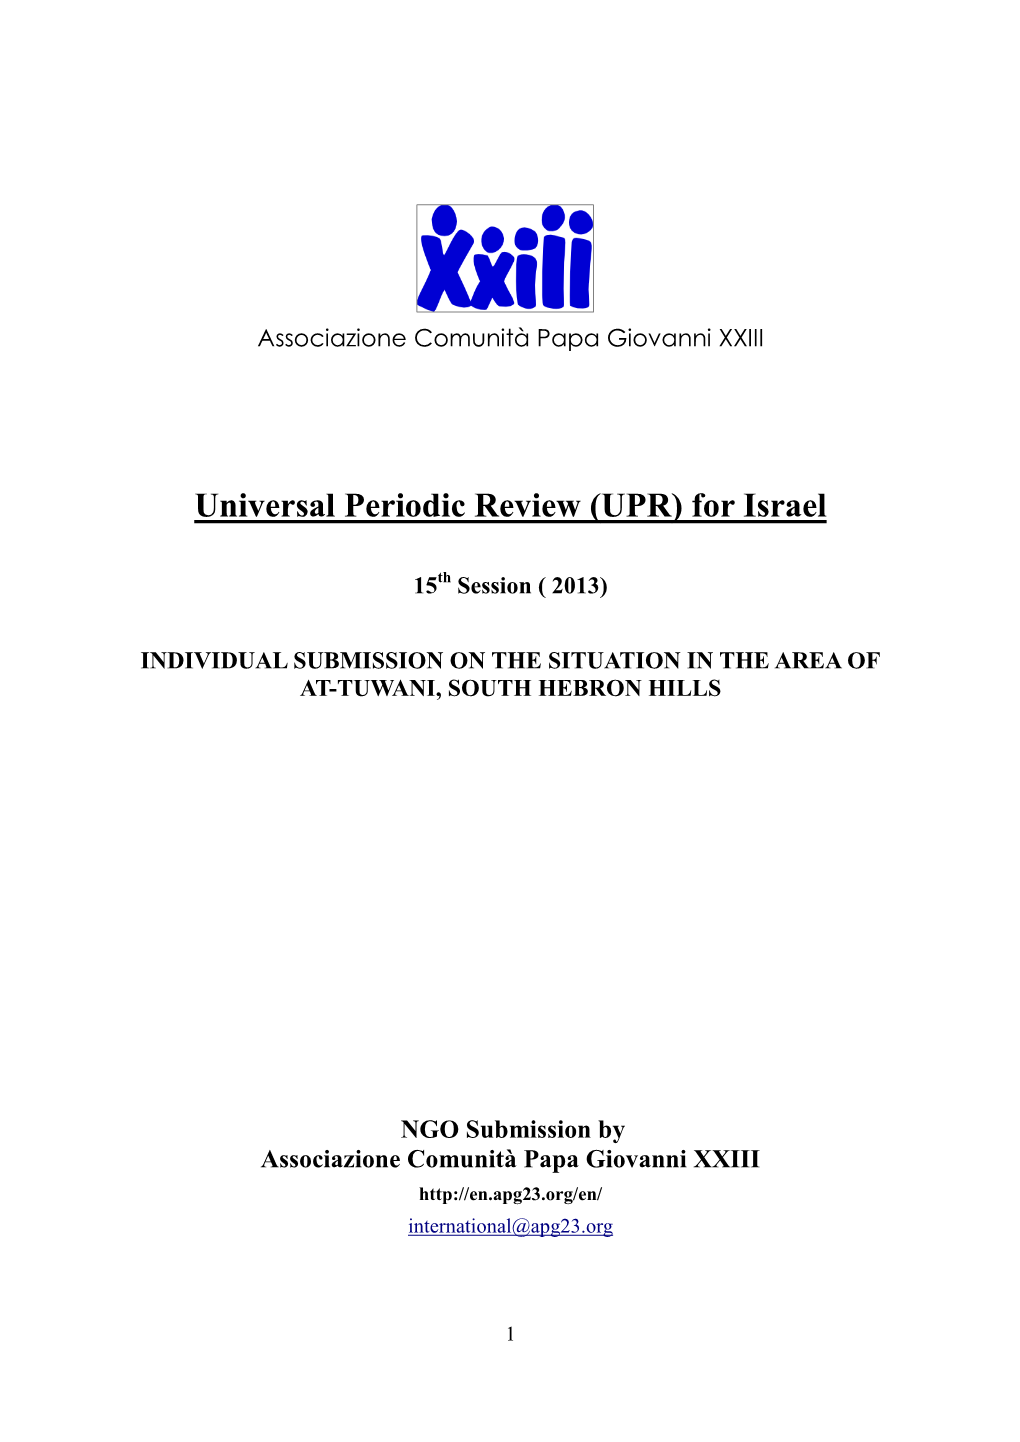 (UPR) for Israel